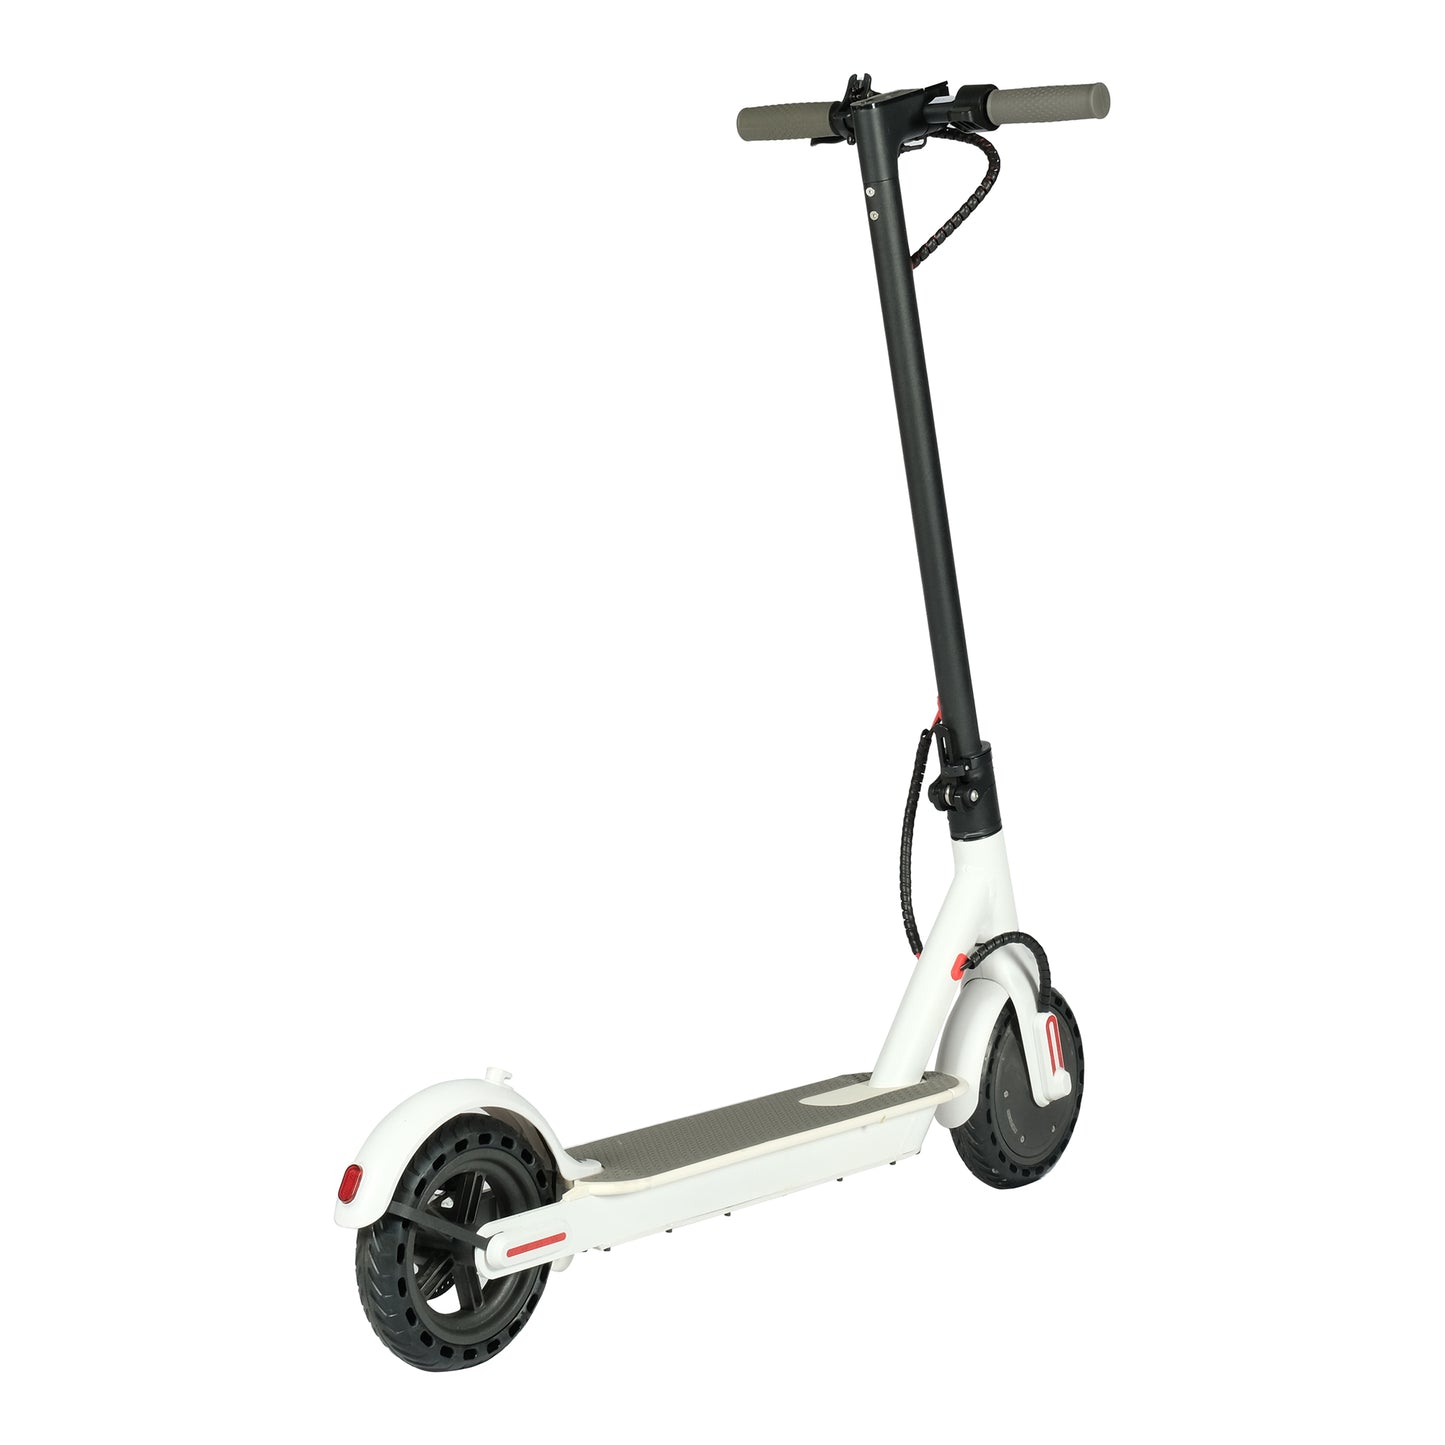 CRONY Q3 Foldable Electric Scooter Electric kick scooters 250W